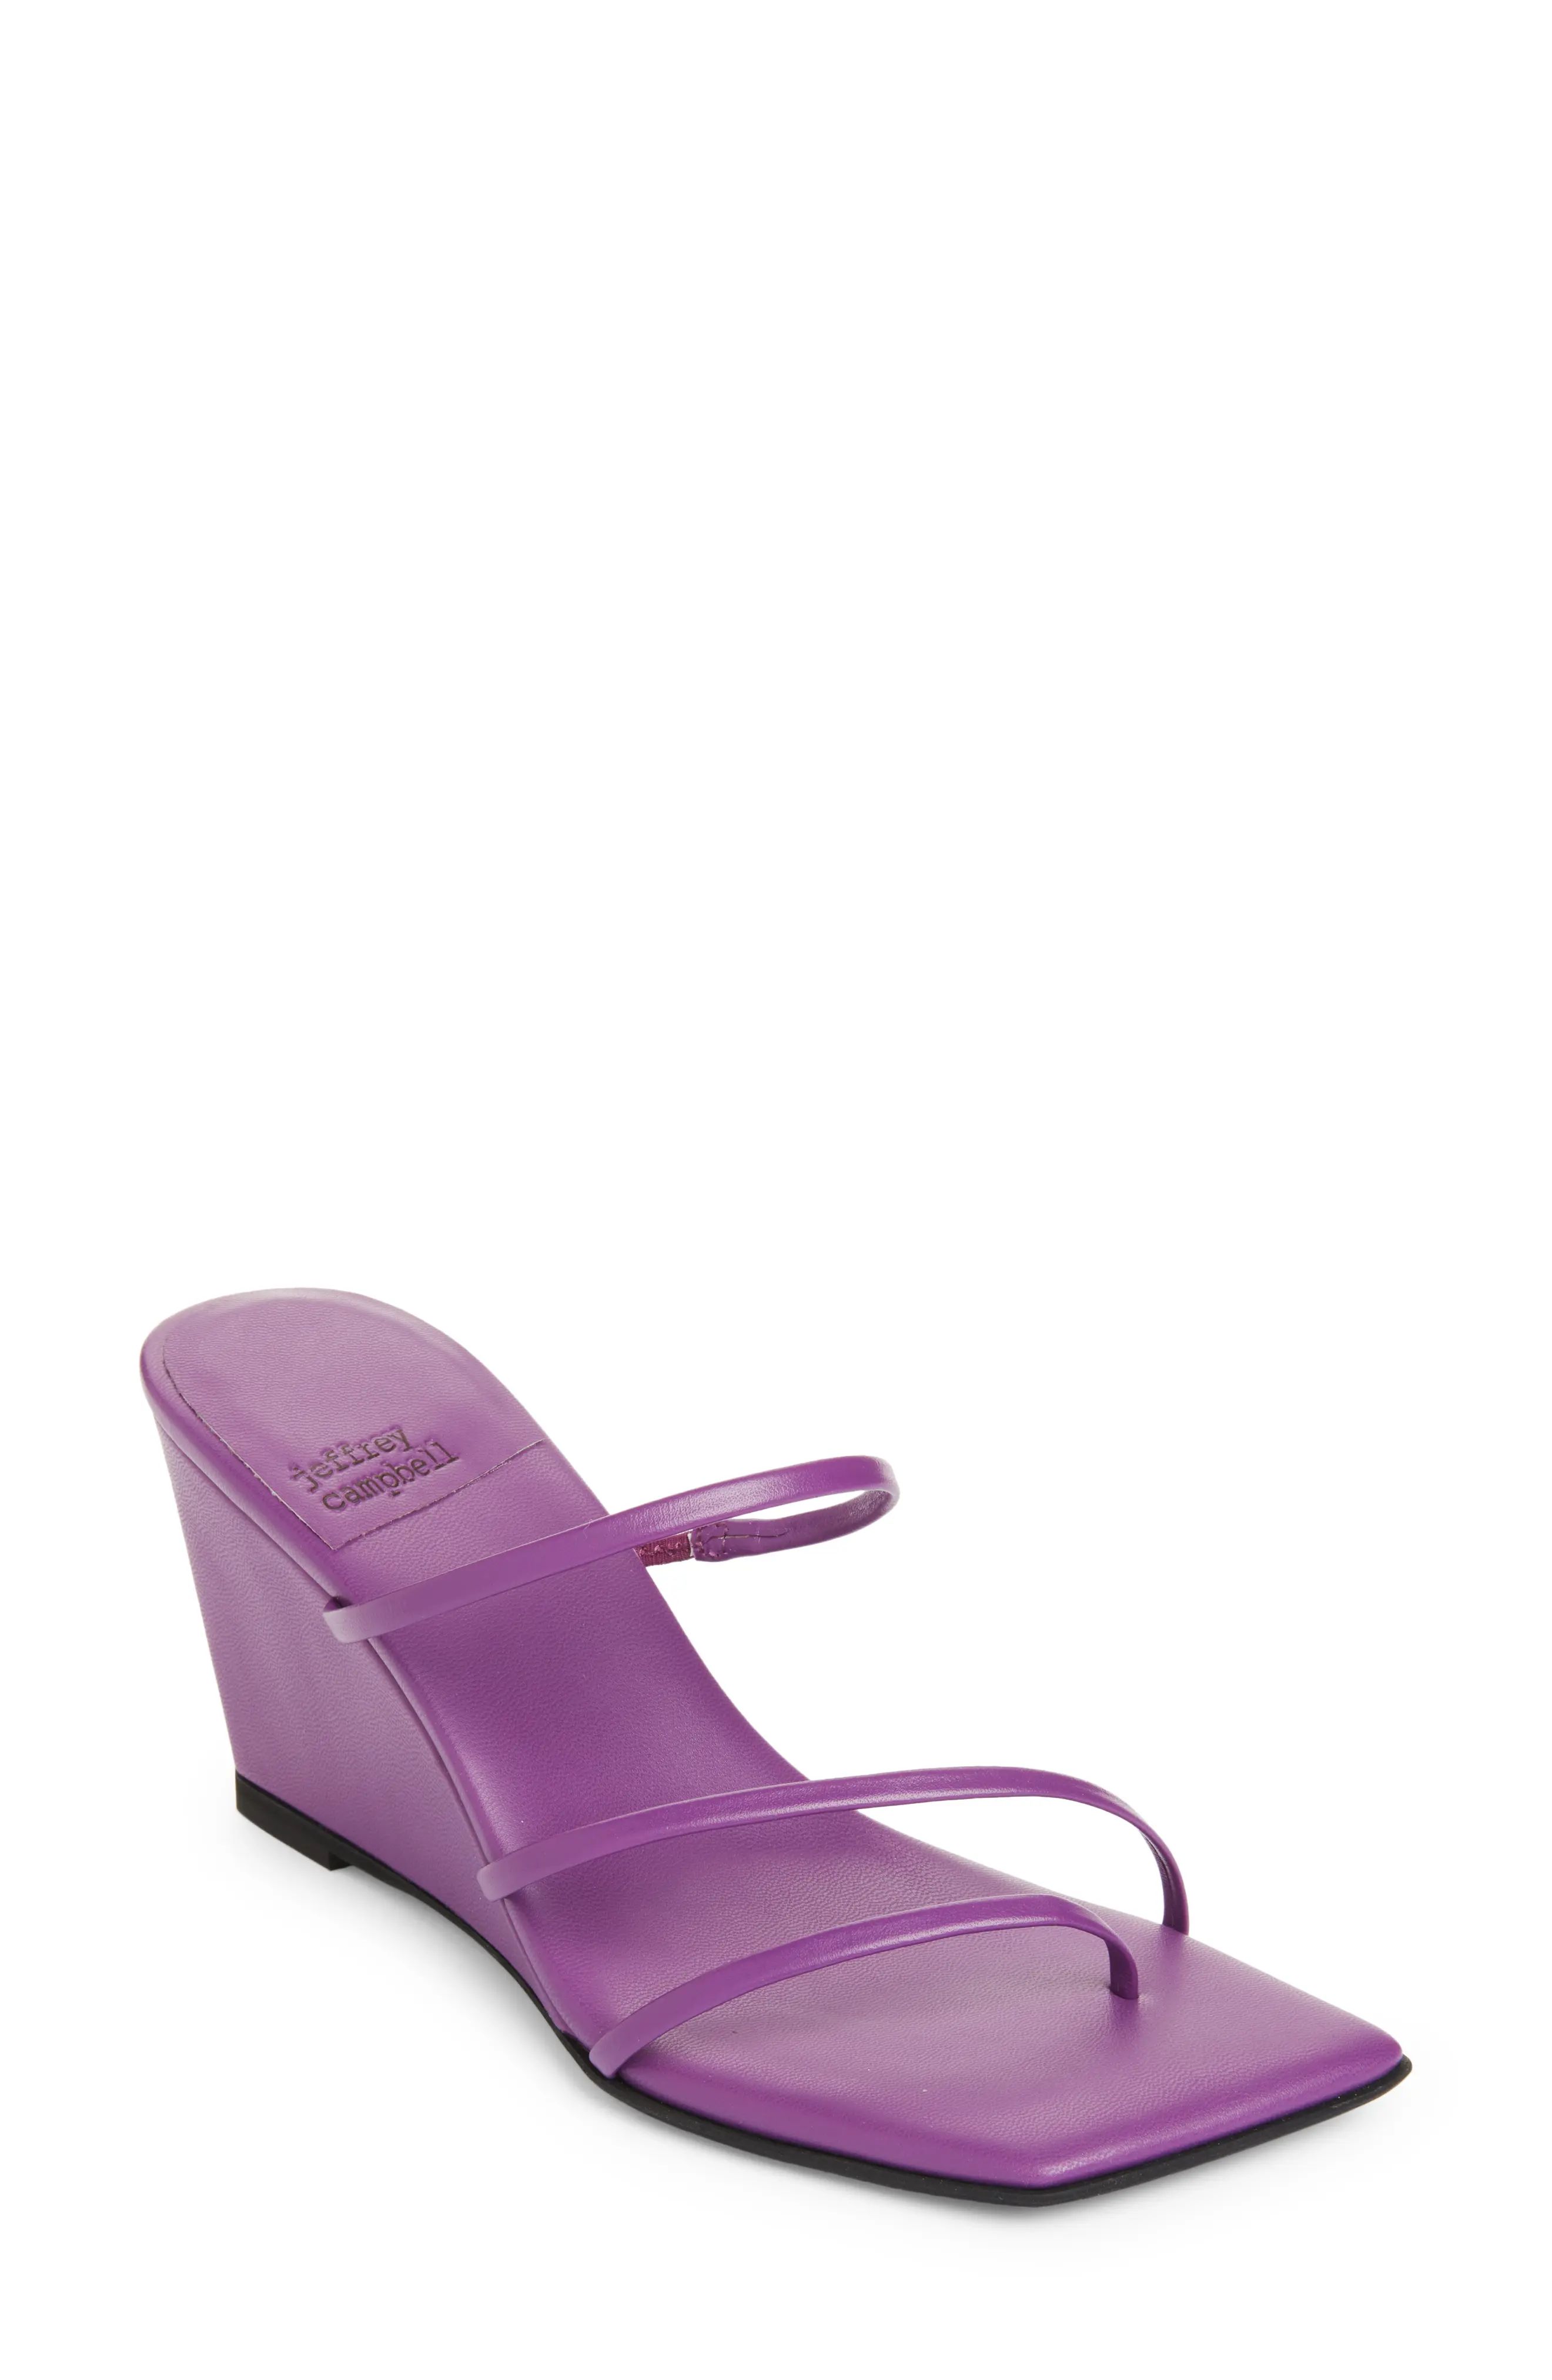 Jeffrey Campbell Palate Sandal in Purple at Nordstrom, Size 11 | Nordstrom